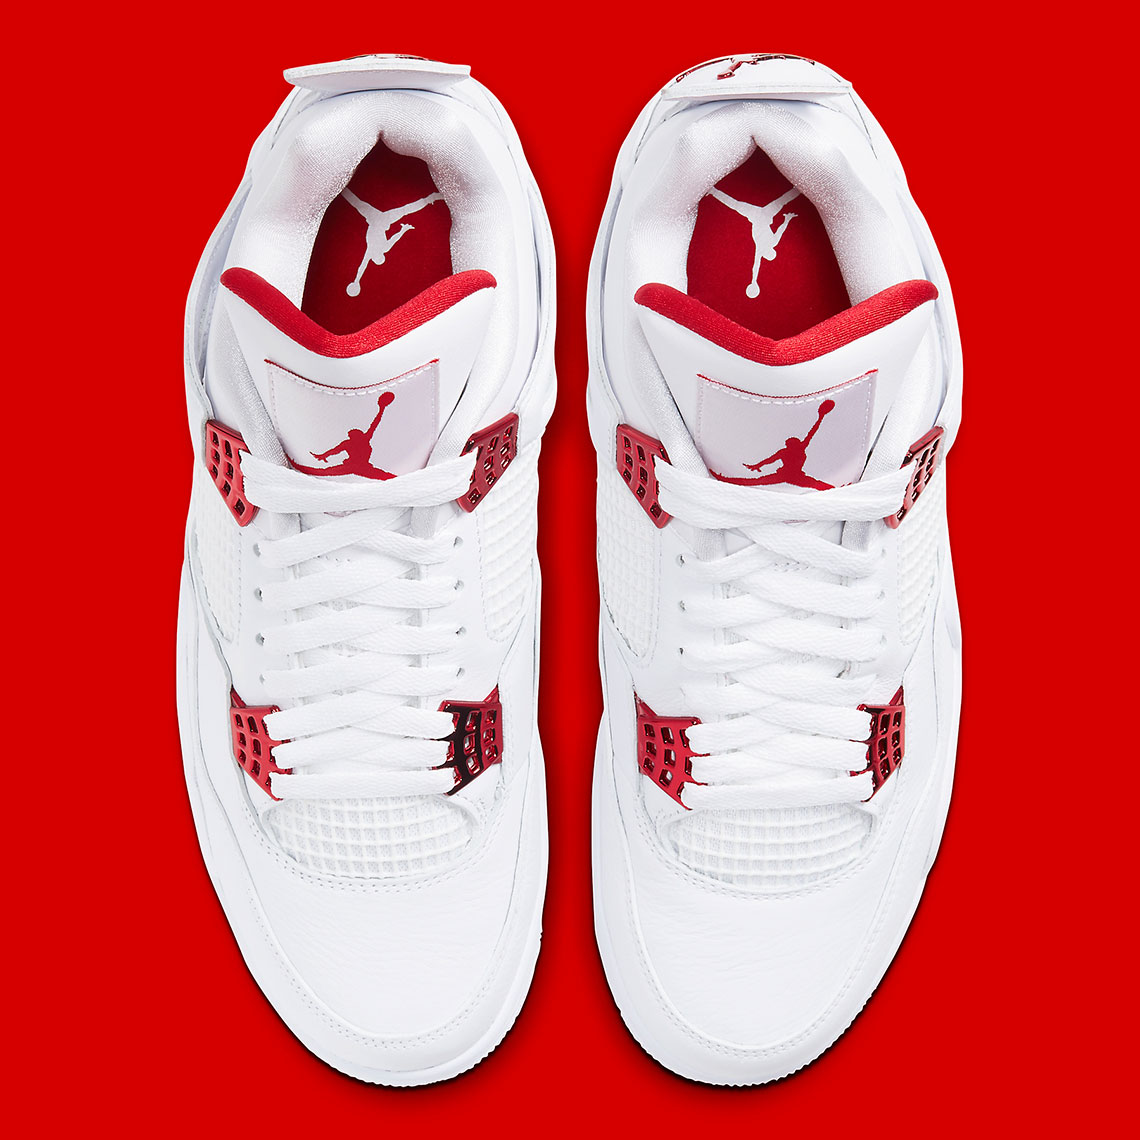 white jordans with red inside